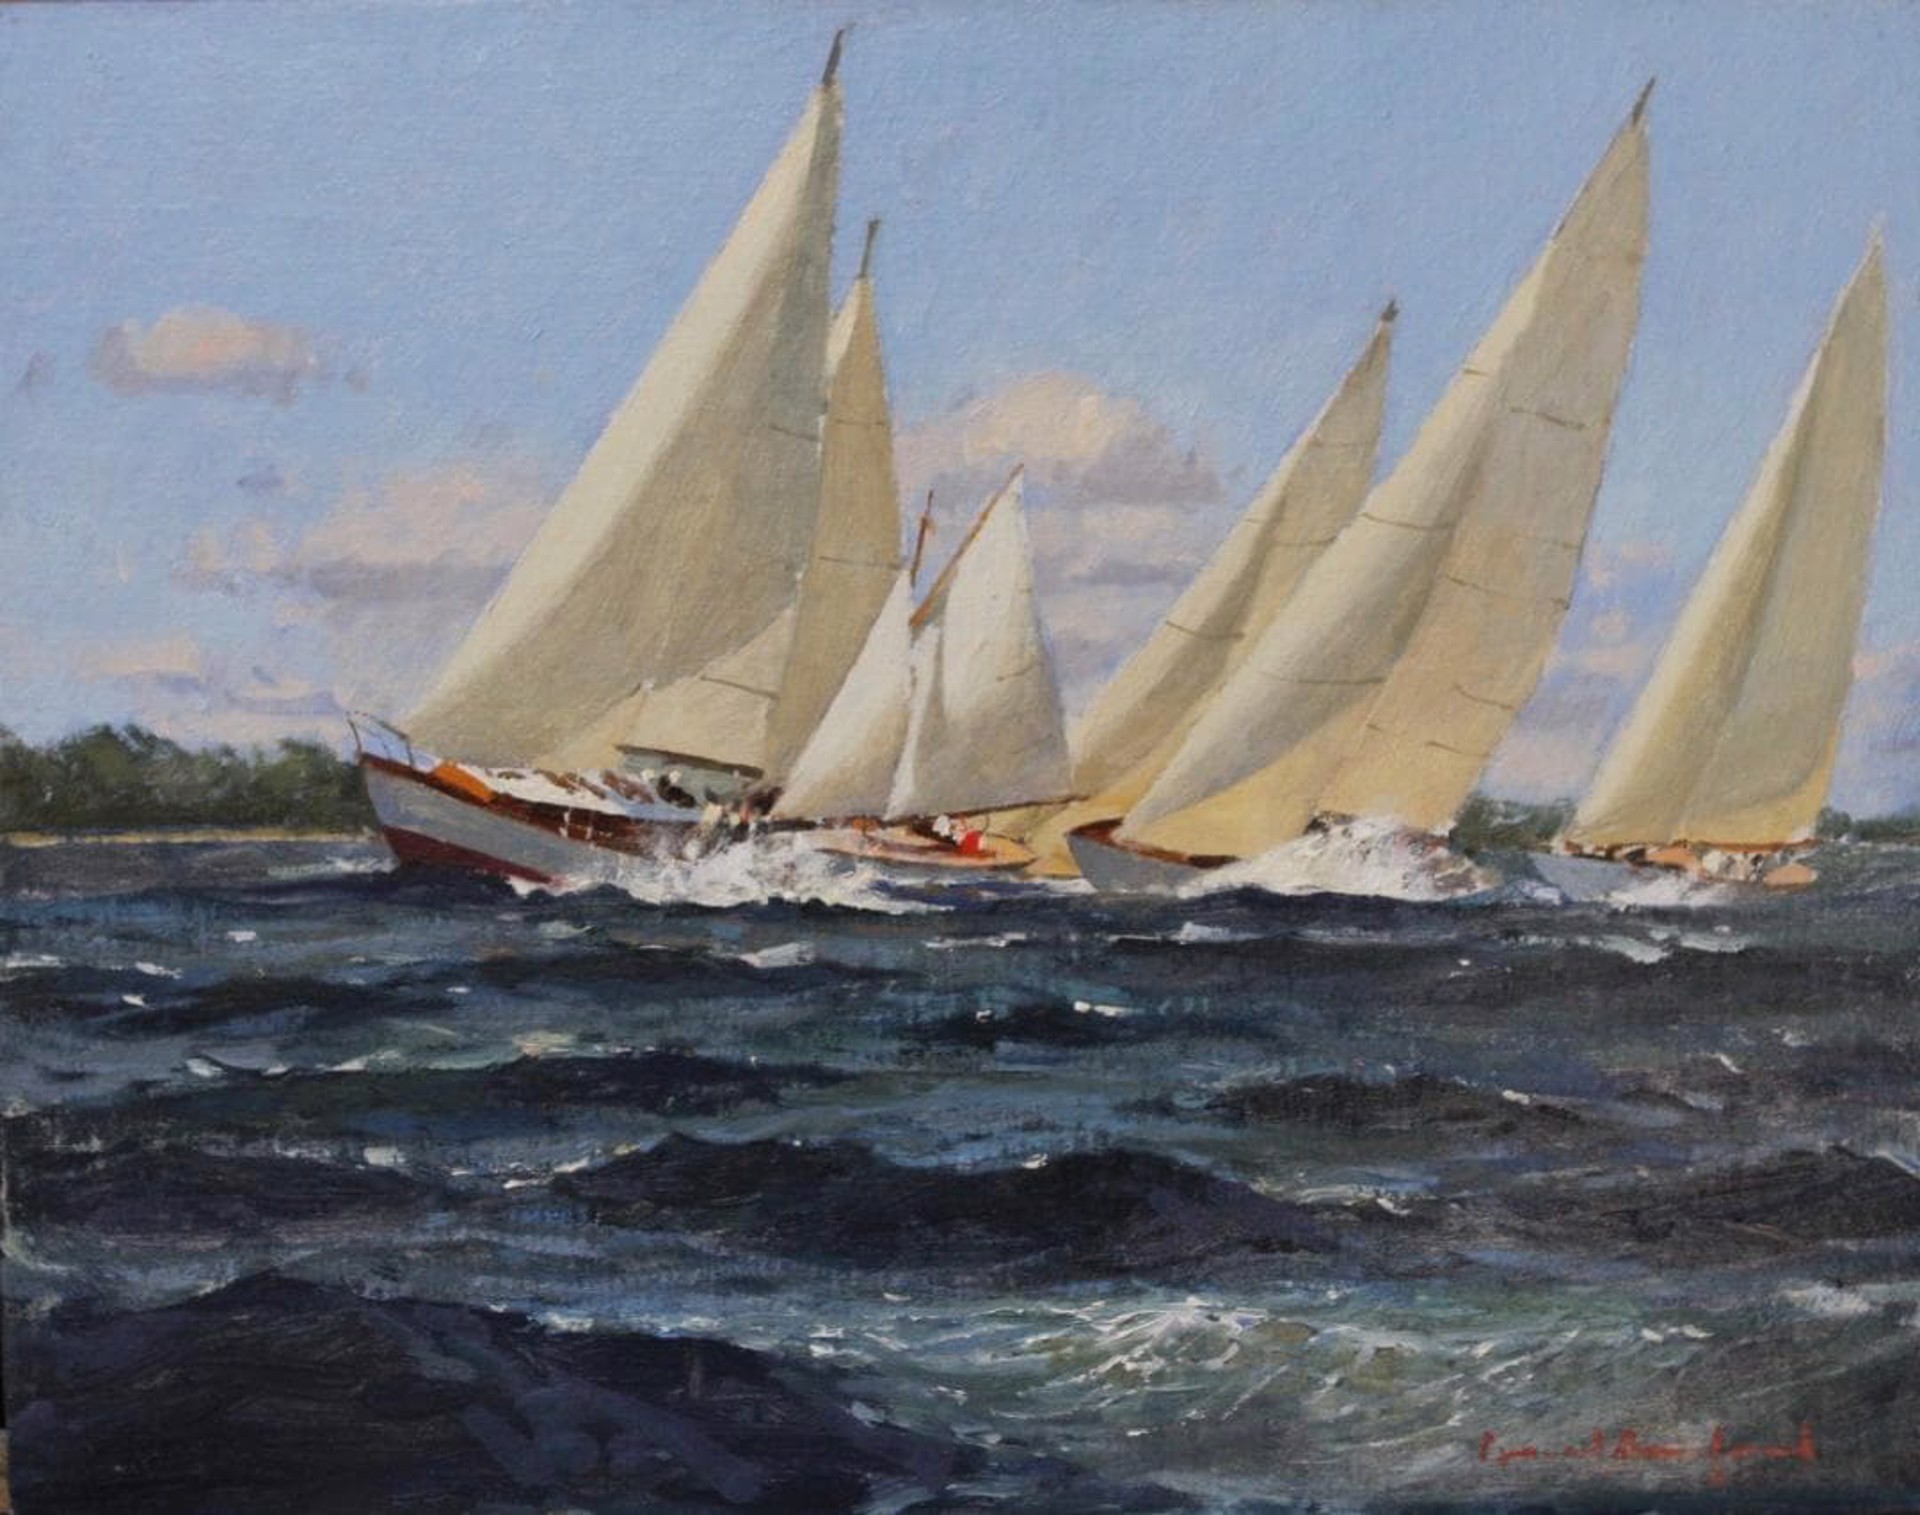 The Start of the Classic Yacht Regatta by David Bareford